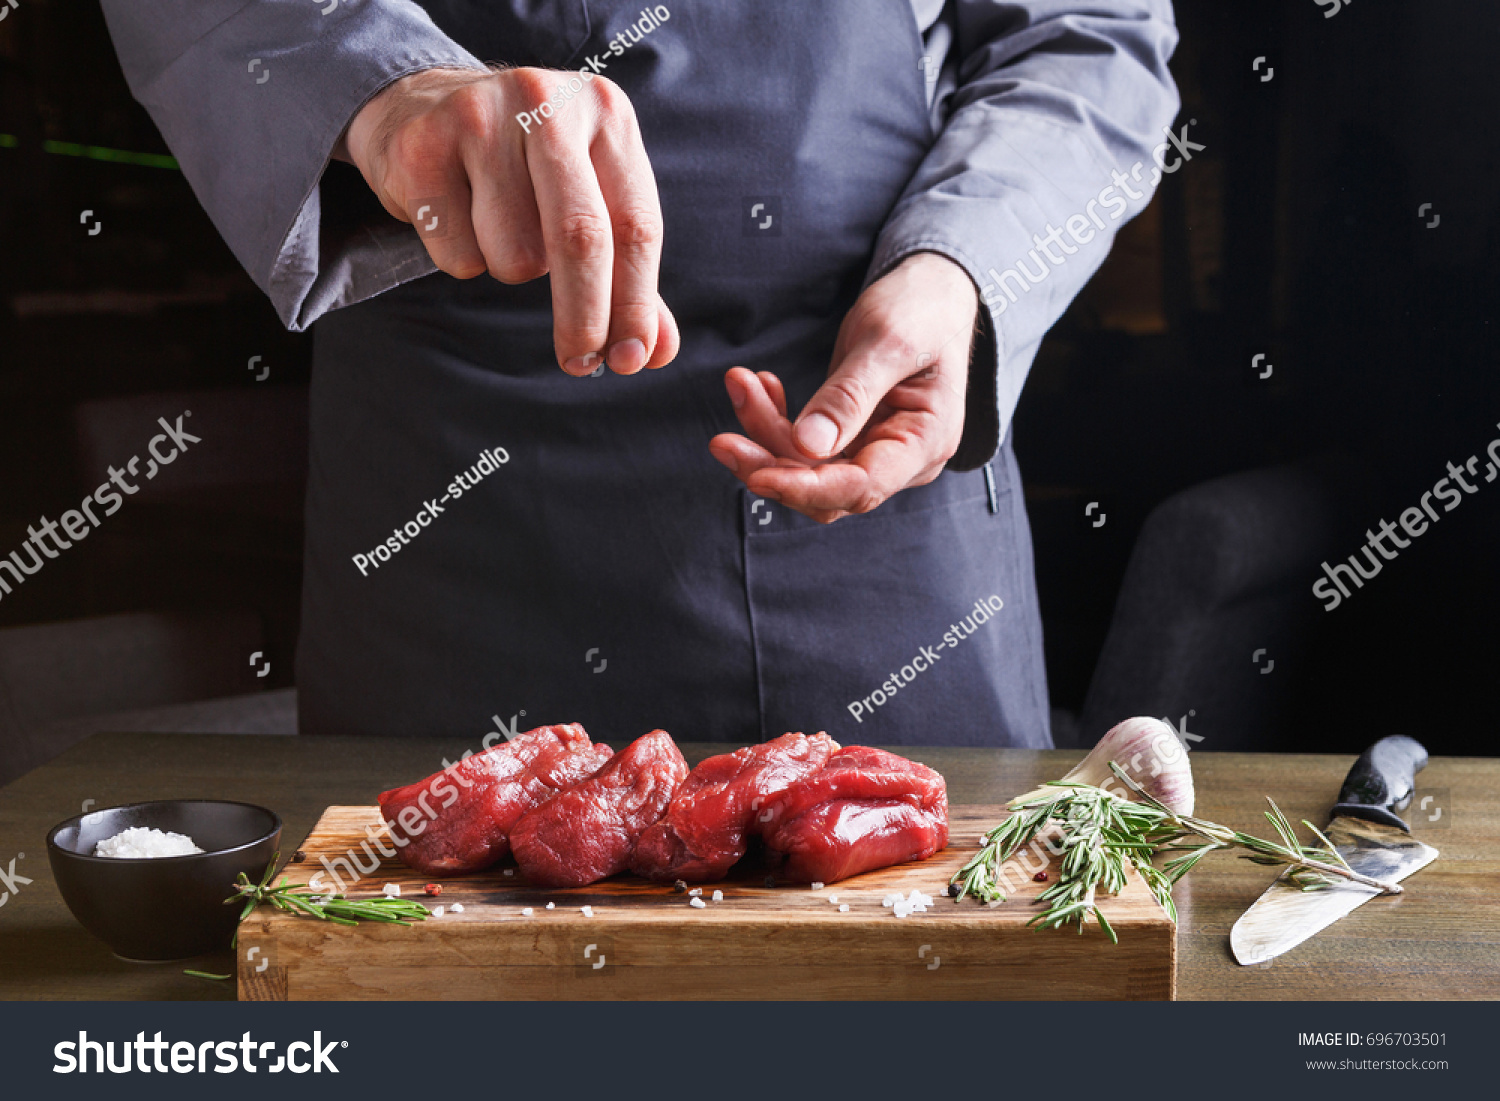 Man sprinkles filet mignon steaks with pepper salt. Chef working at open restaurant kitchen. Fresh meat, garlic and rosemary on wooden board. Modern restaurant cuisine backgroung #696703501